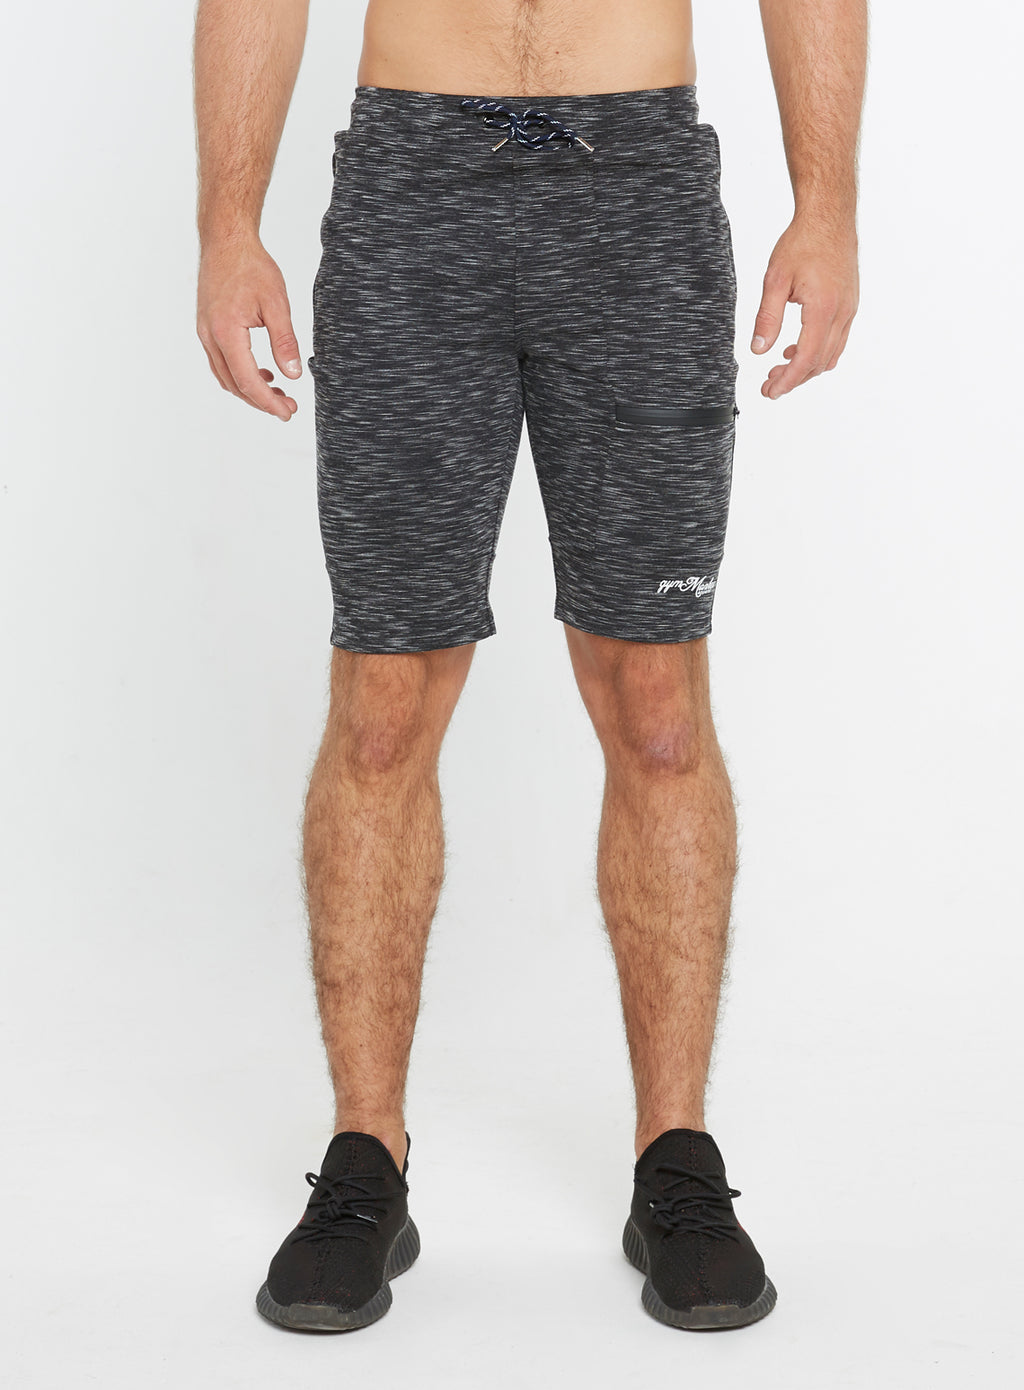 Gym Monkee - Black Striped Shorts FRONT